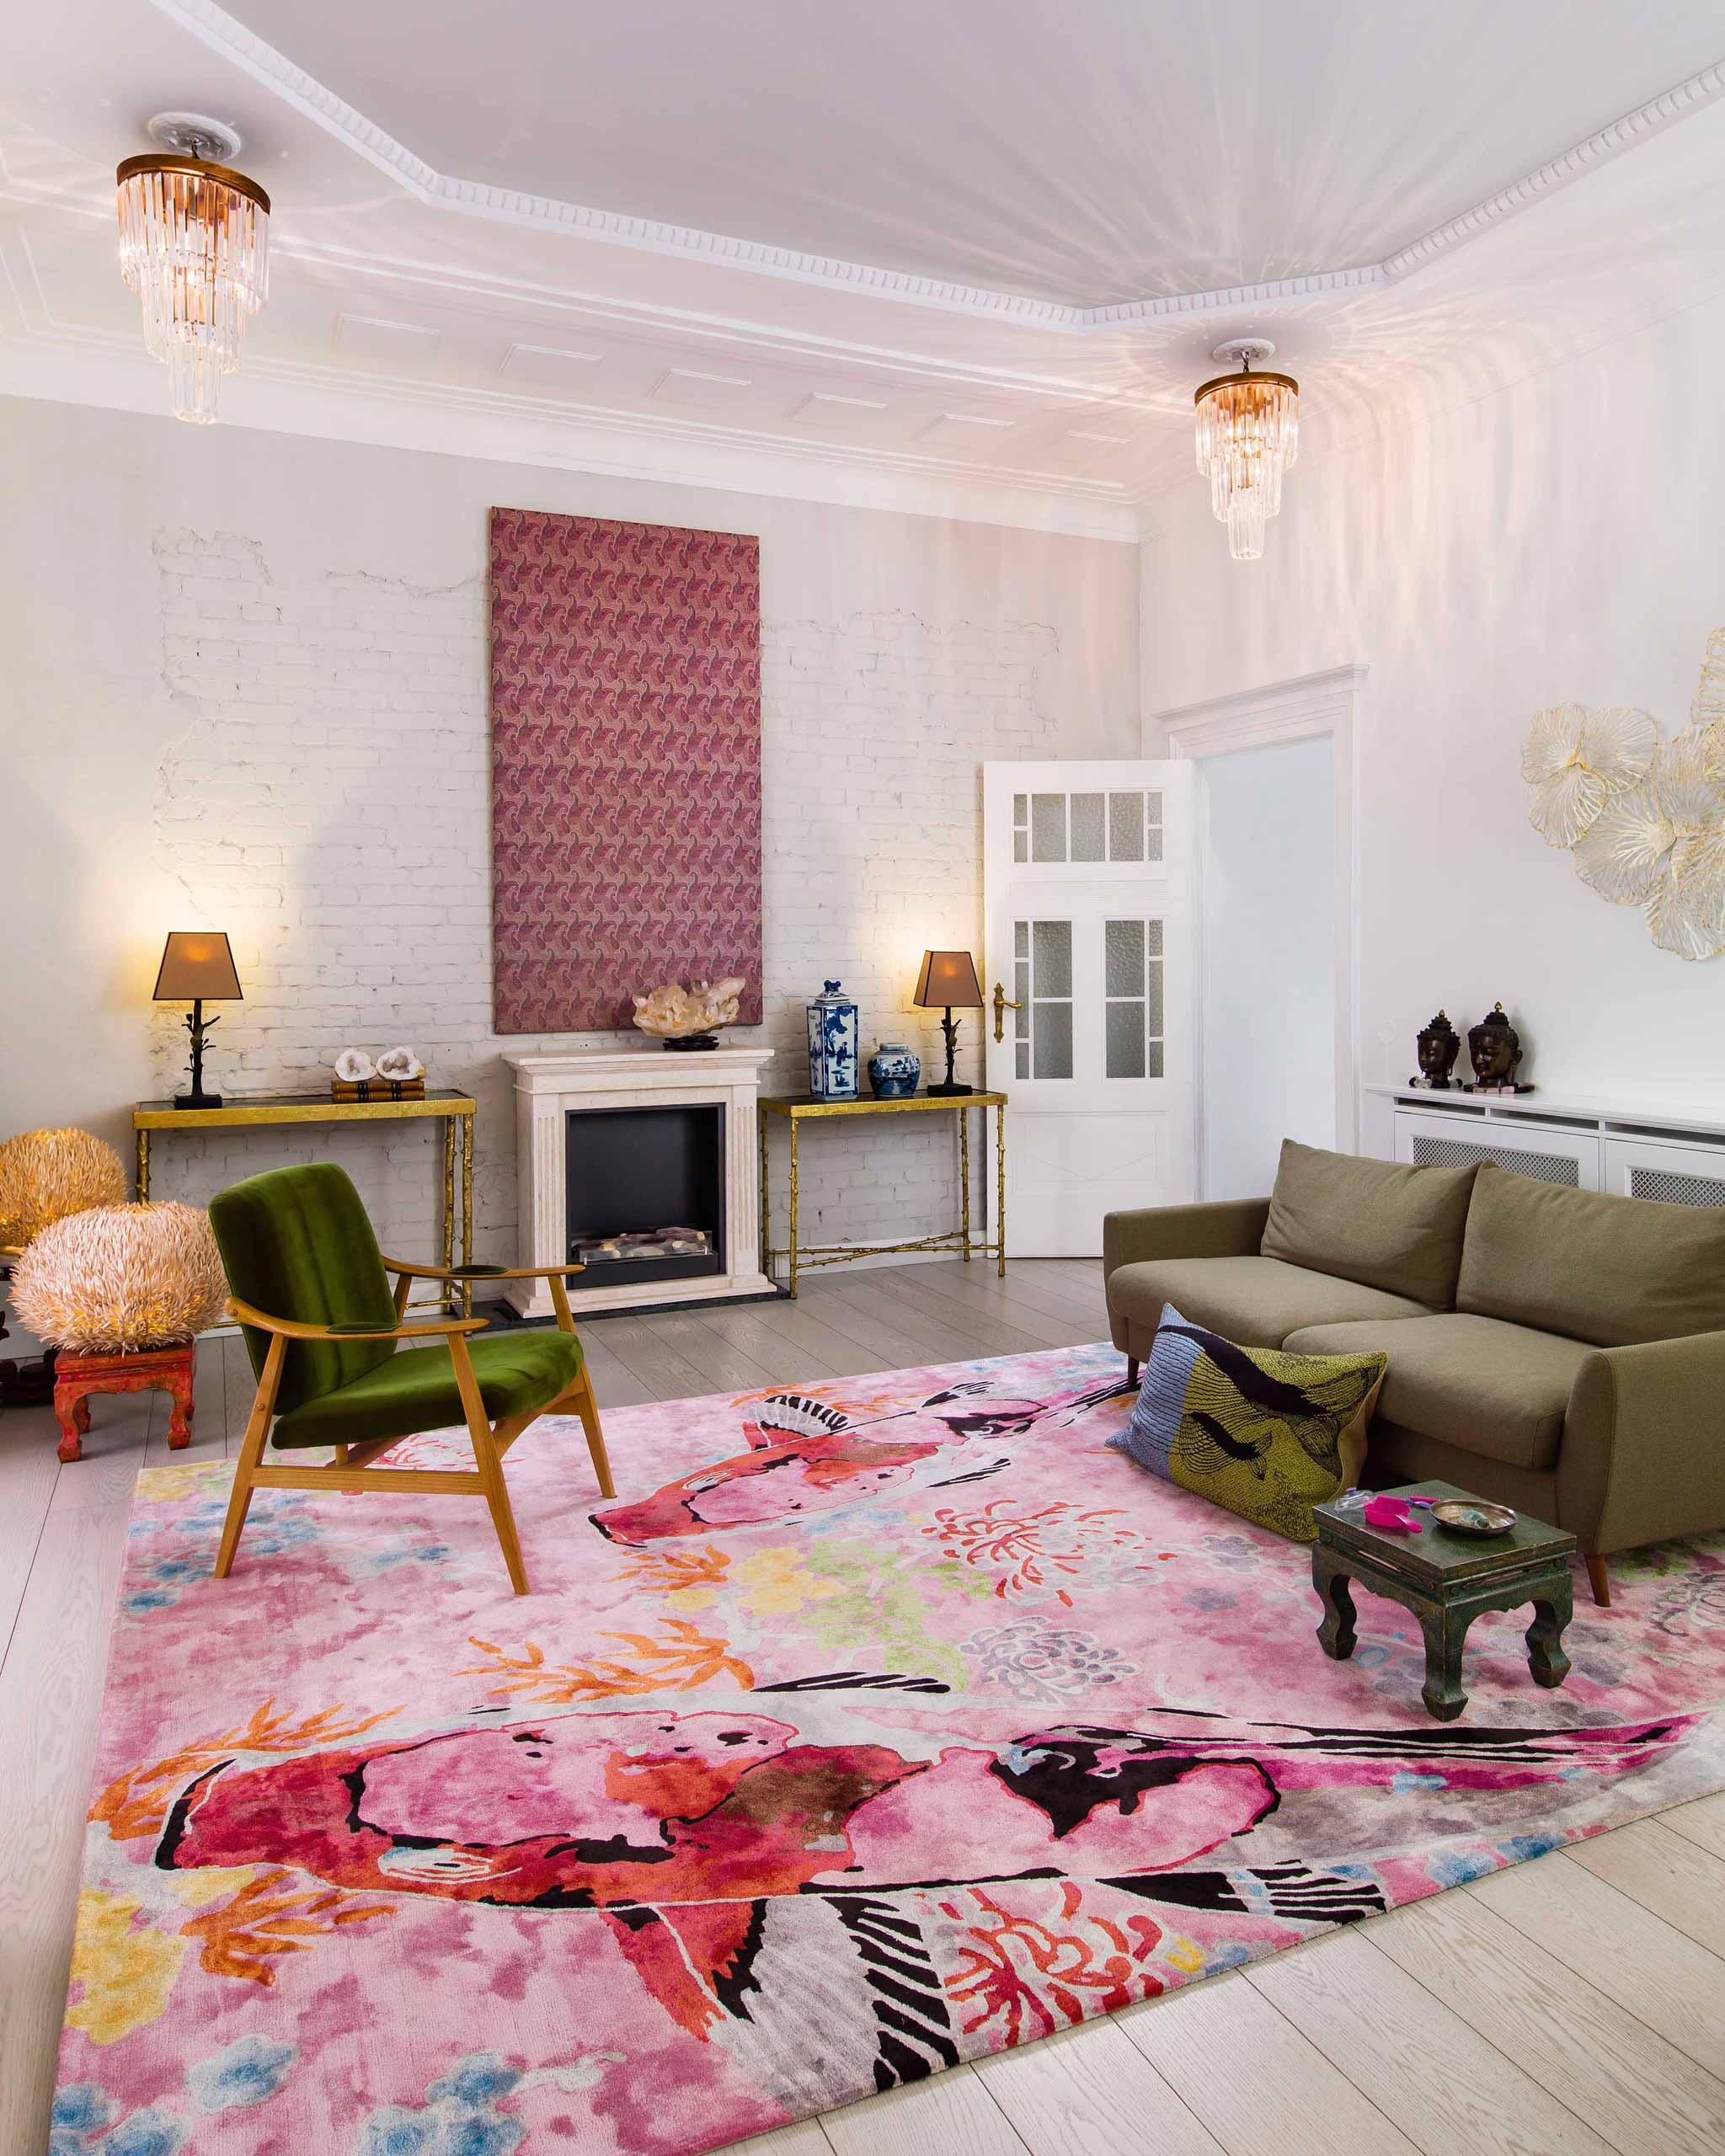 Koi 2 shown in colour Pink shown in situ as part of Rug Star by Jürgen Dahlmanns' 'Intimacy Berlin' Photogrpahy Project. |Image courtesy of Rug Star.